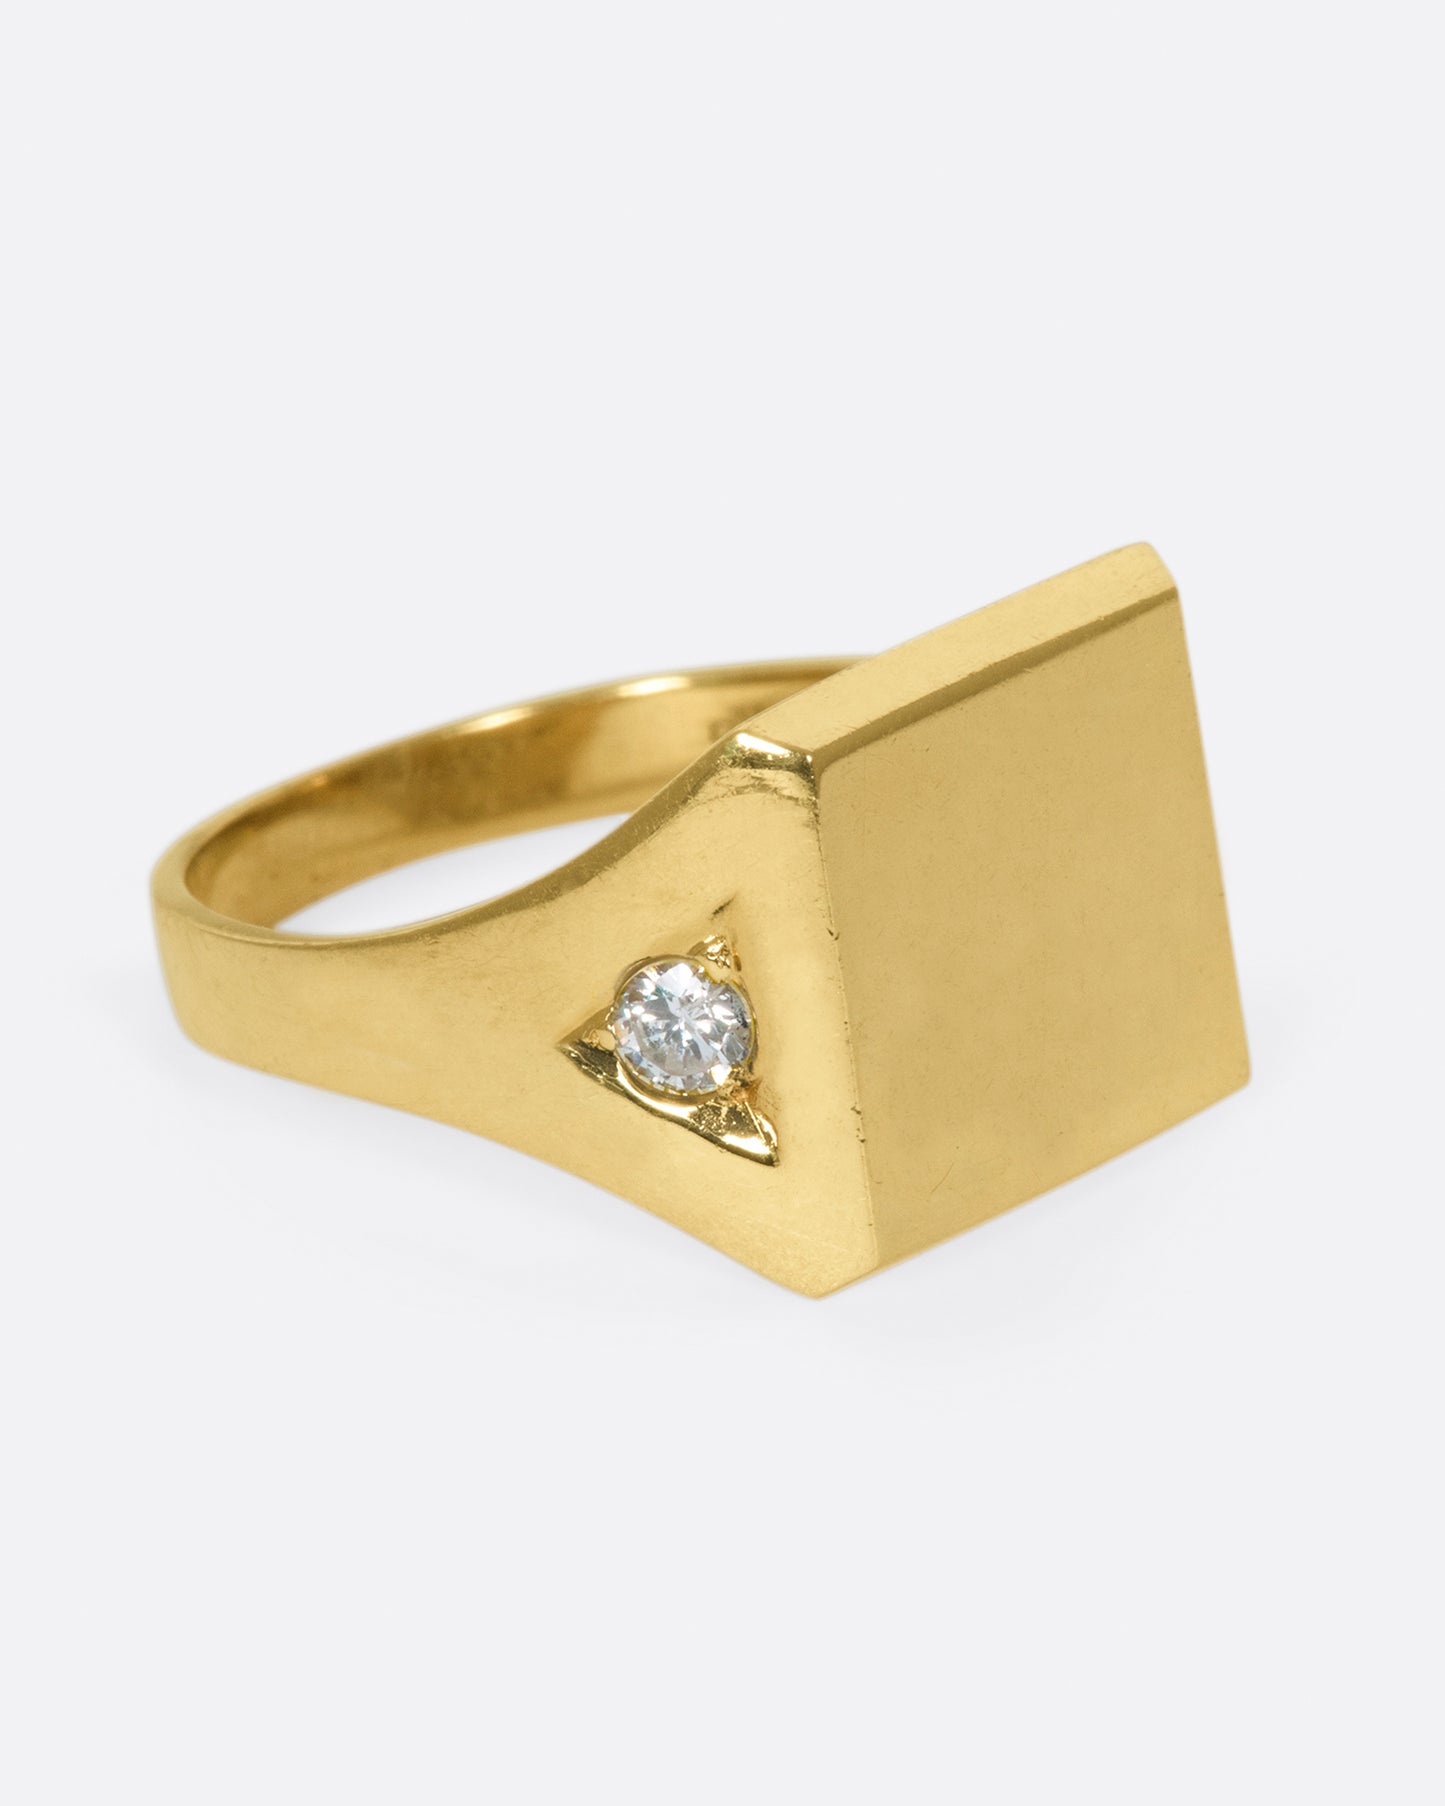 This blank signet is just as cool as is, with its diamond accents, as it would be with your or a loved one's initials.